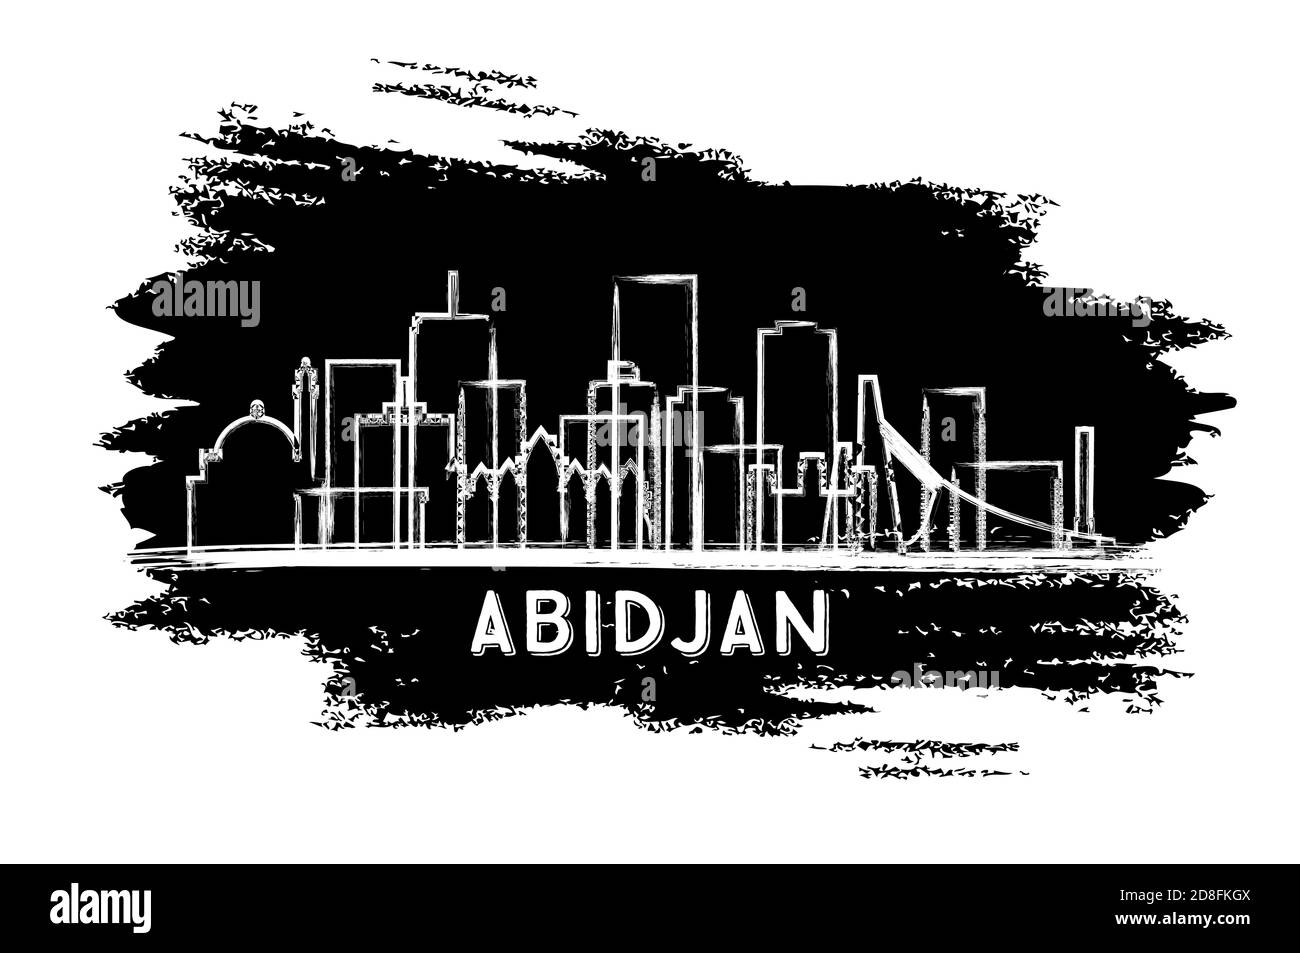 Abidjan Ivory Coast City Skyline Silhouette. Hand Drawn Sketch. Business Travel and Tourism Concept with Historic Architecture. Vector Illustration. Stock Vector